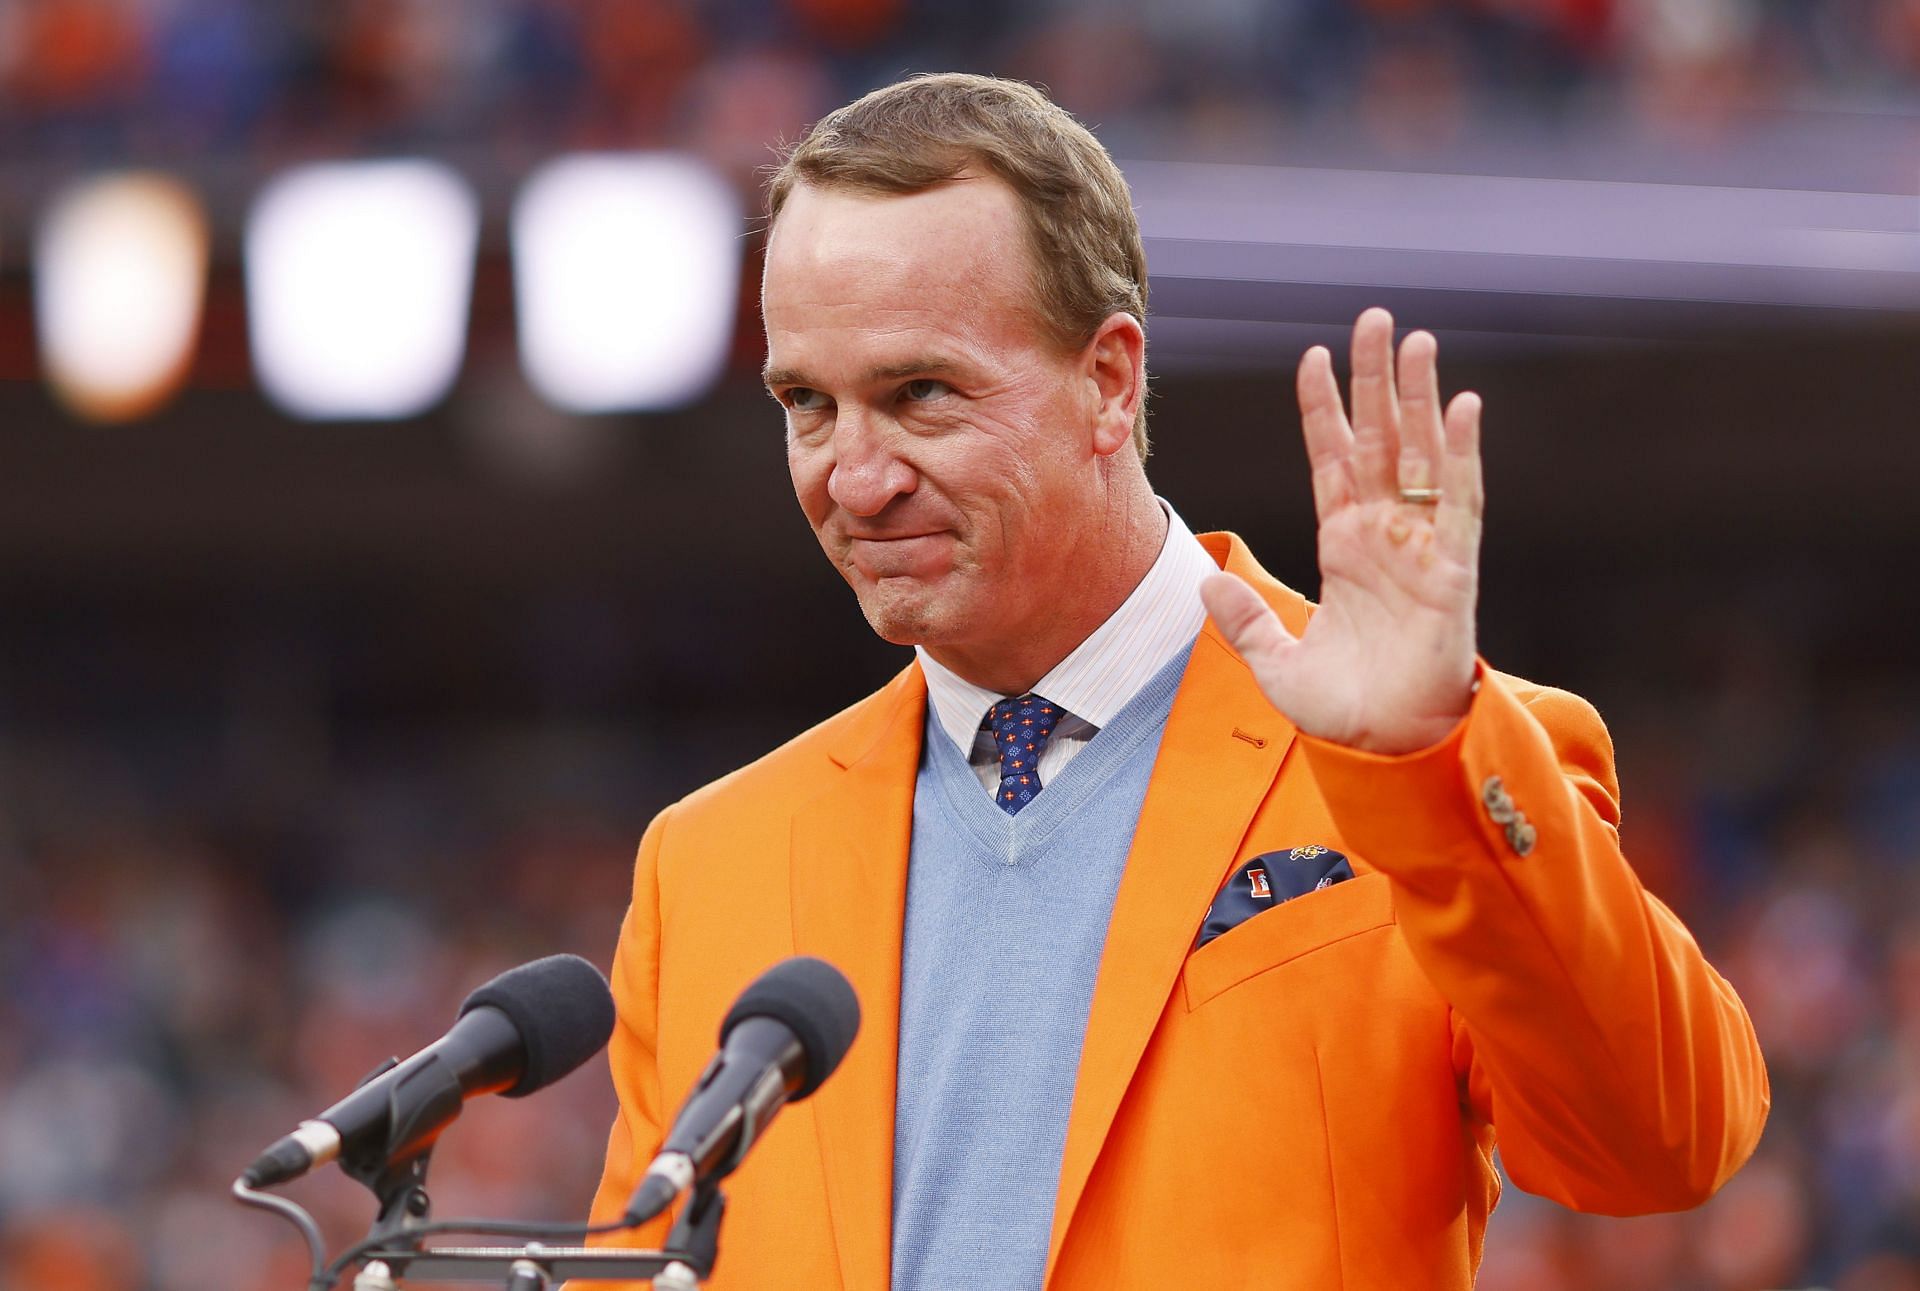 Peyton Manning runs a production company capitalizing on his media fame